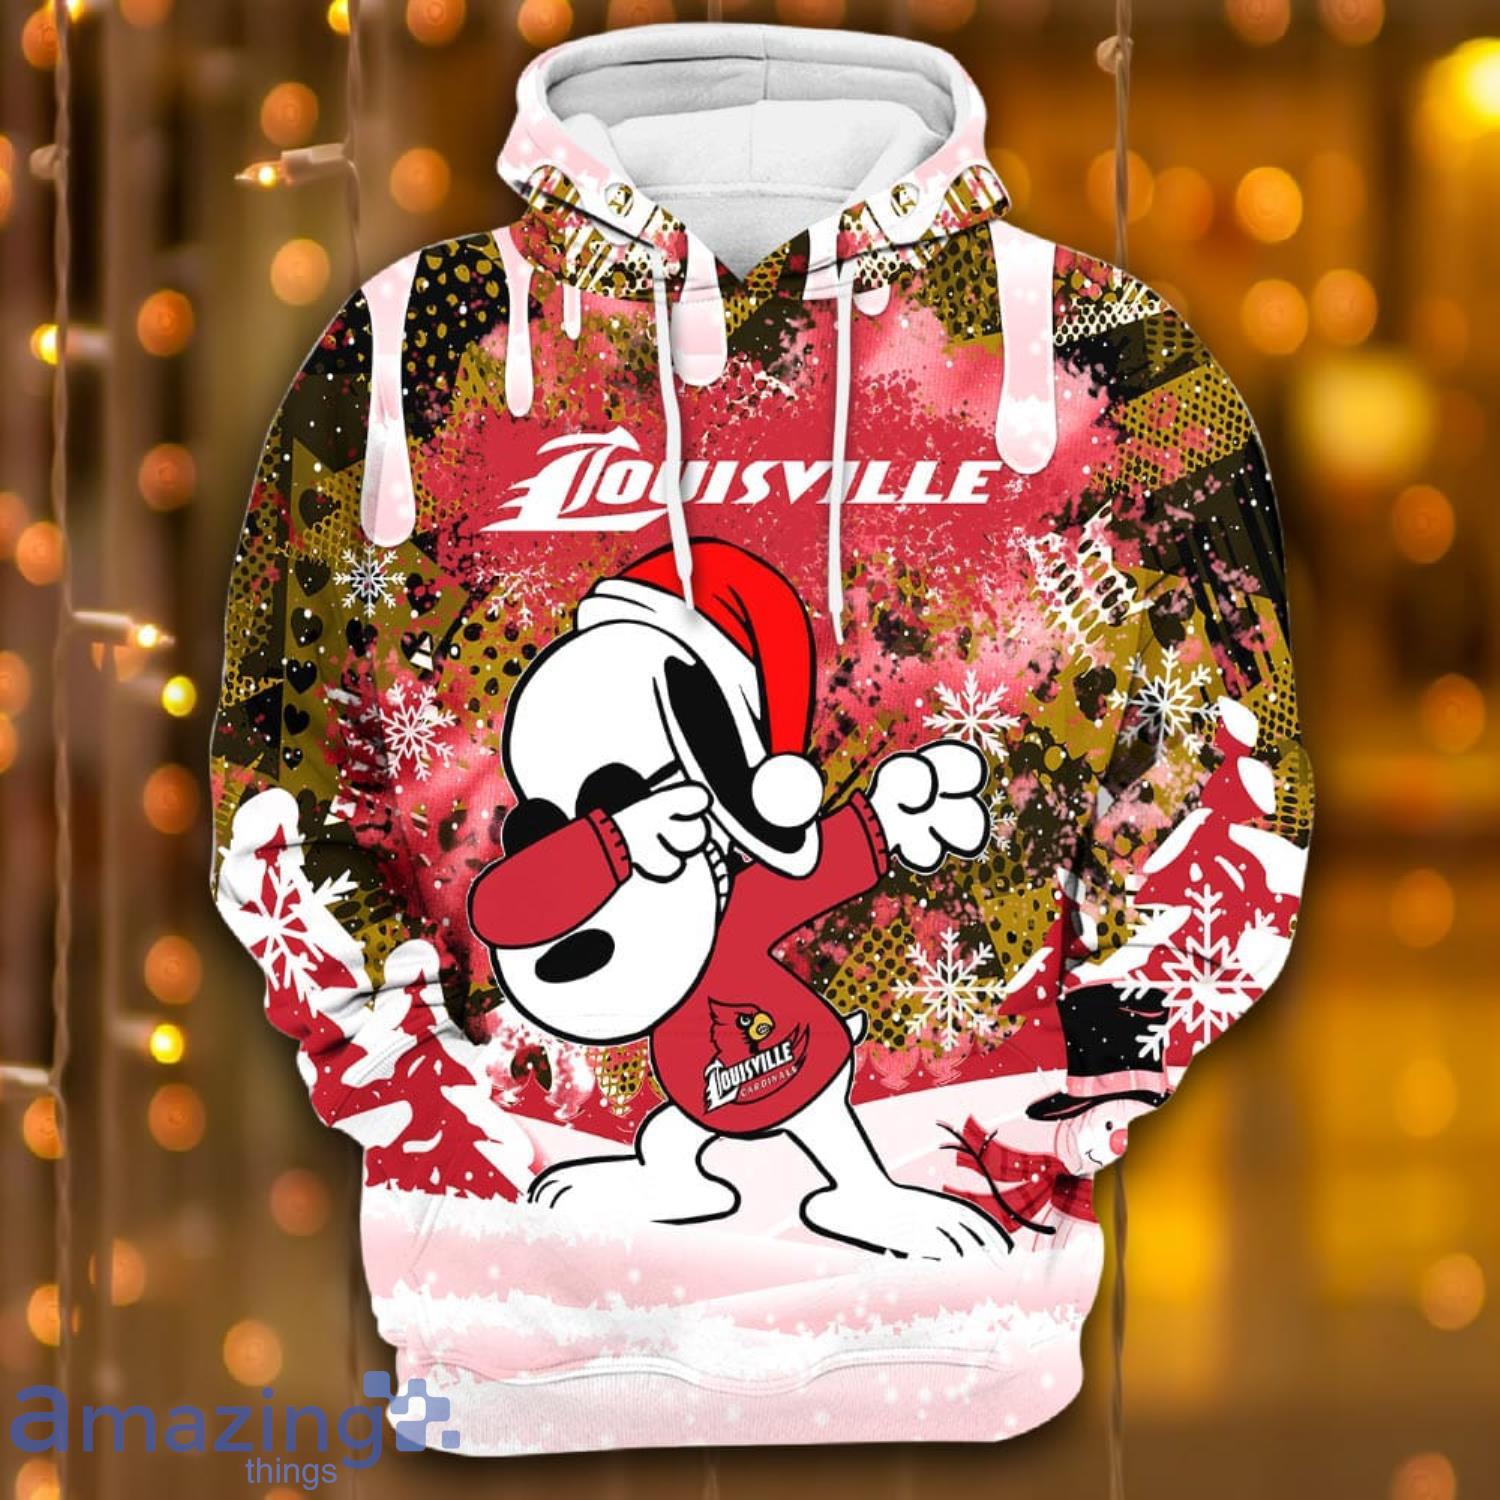 Louisville Cardinals Snoopy Cute Heart American Sports Team Funny 3D  Sweater For Men And Women Gift Christmas - Banantees